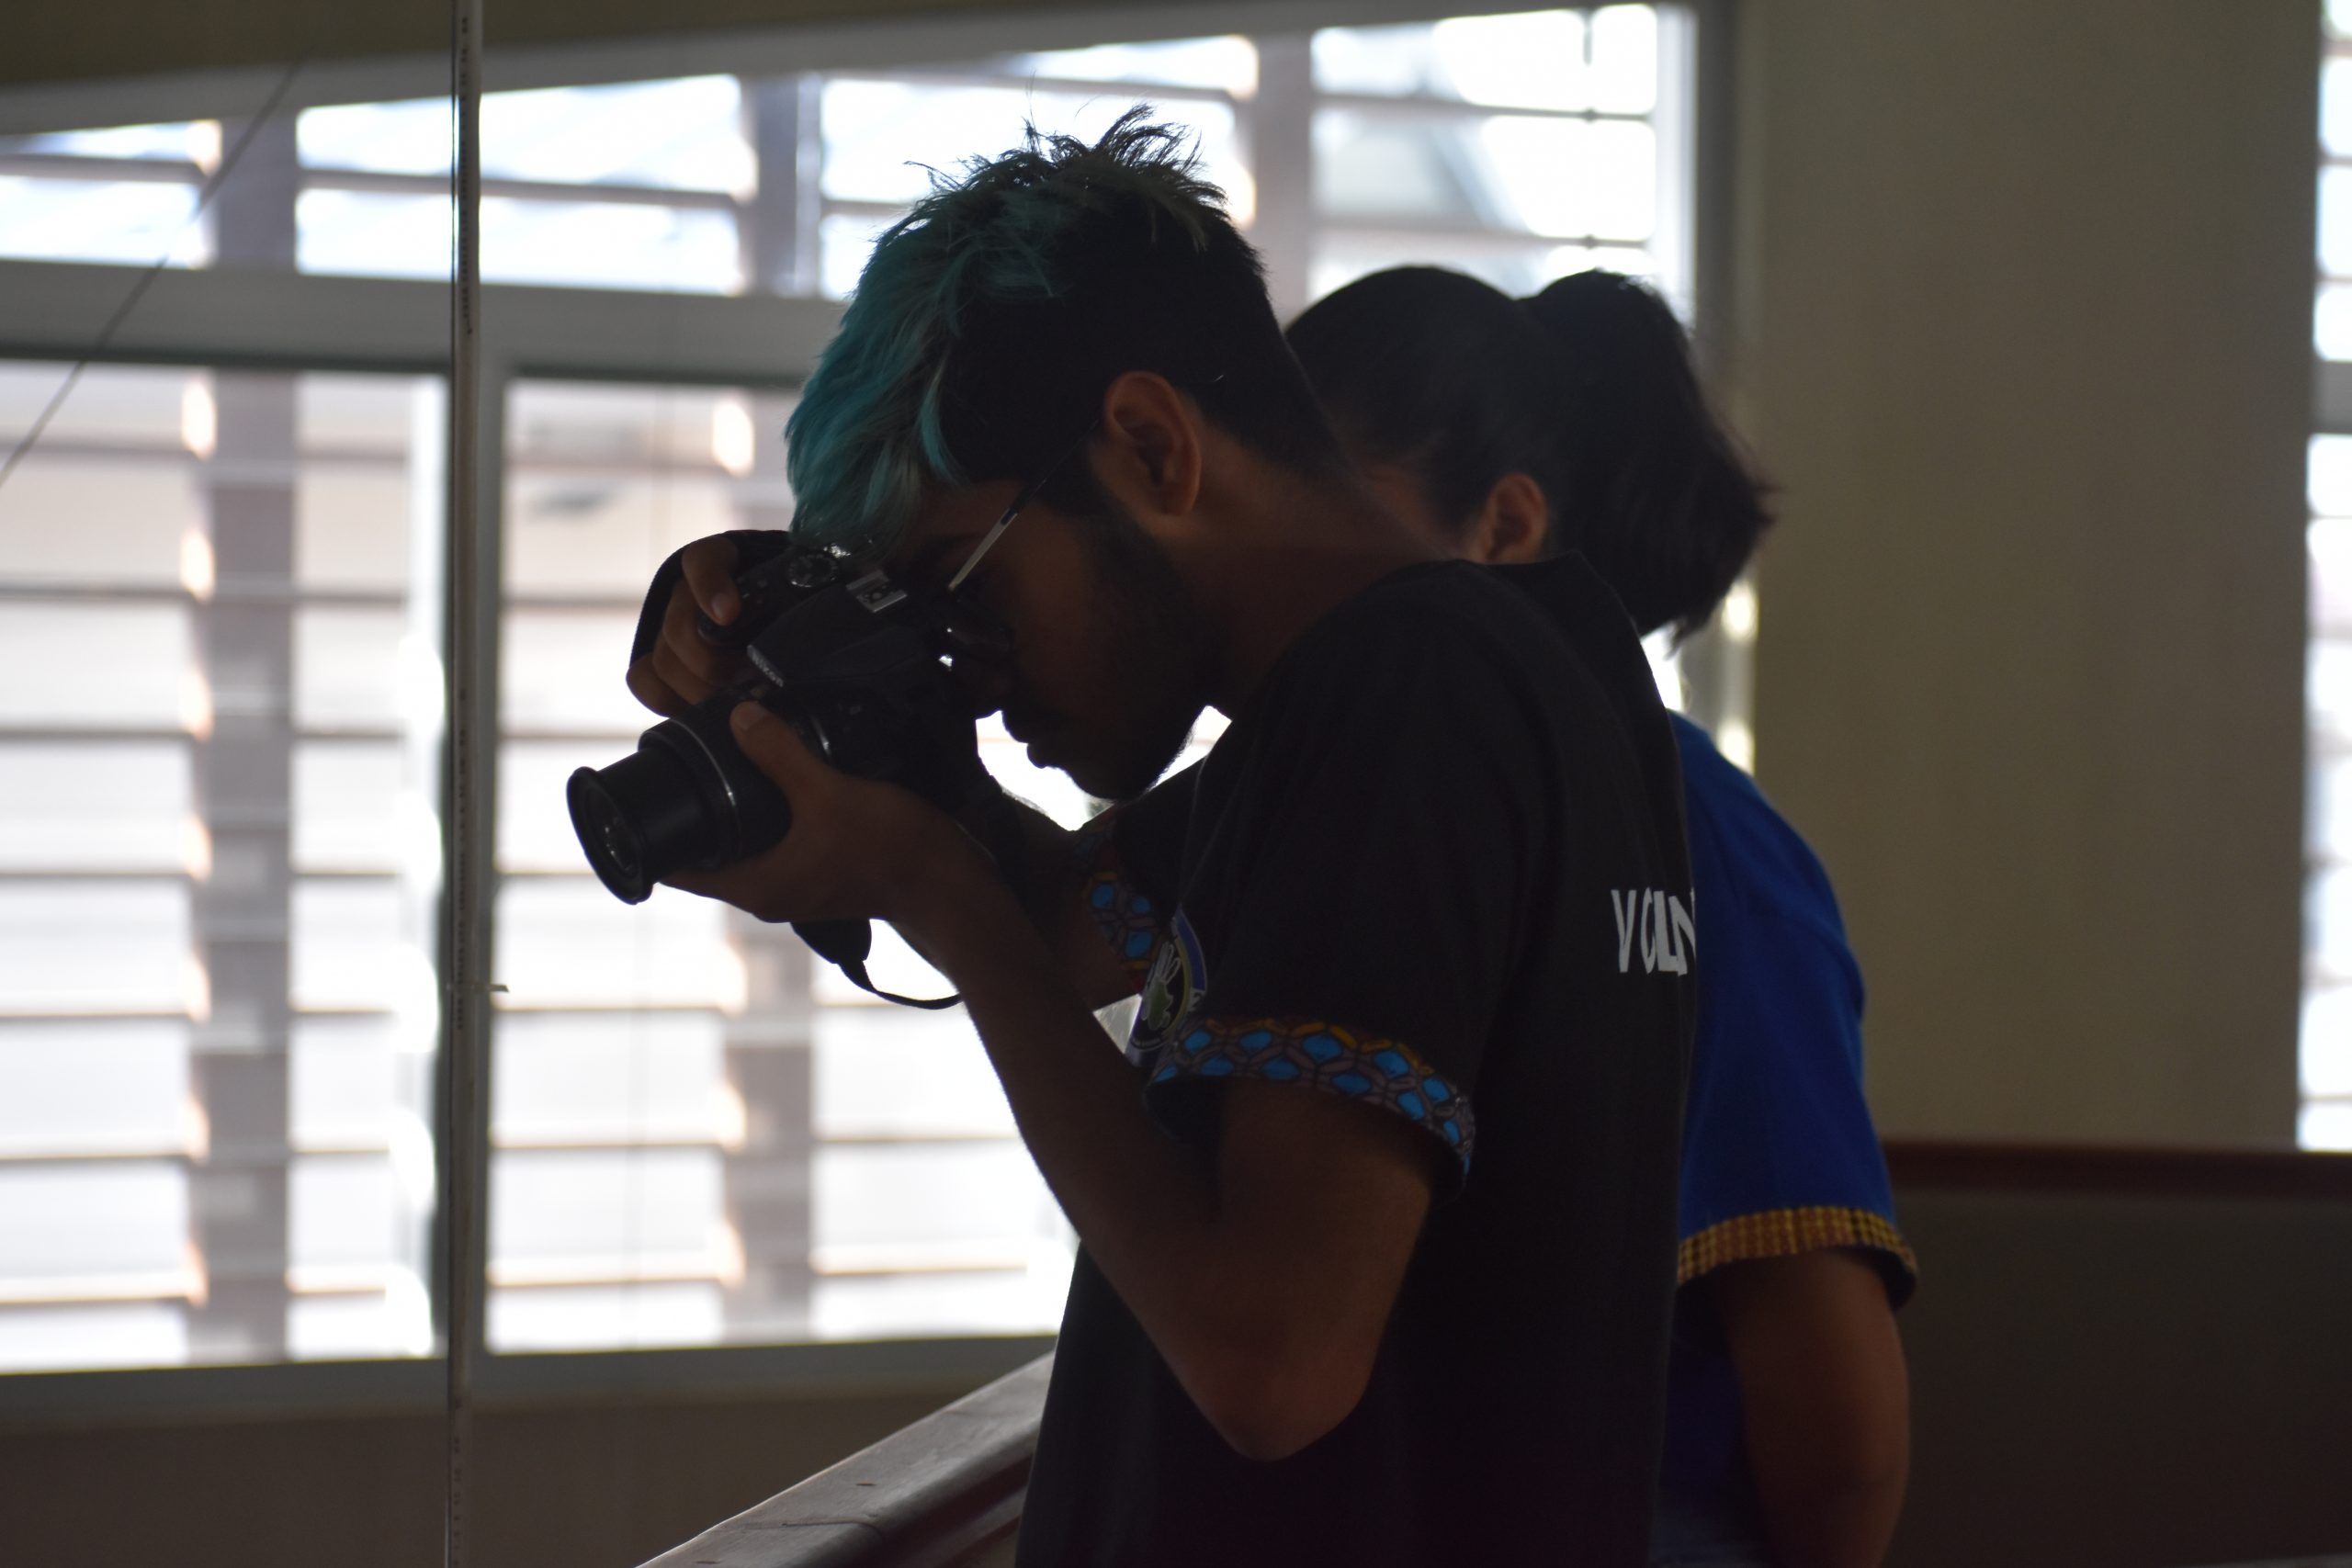 Photography at GISS 2019